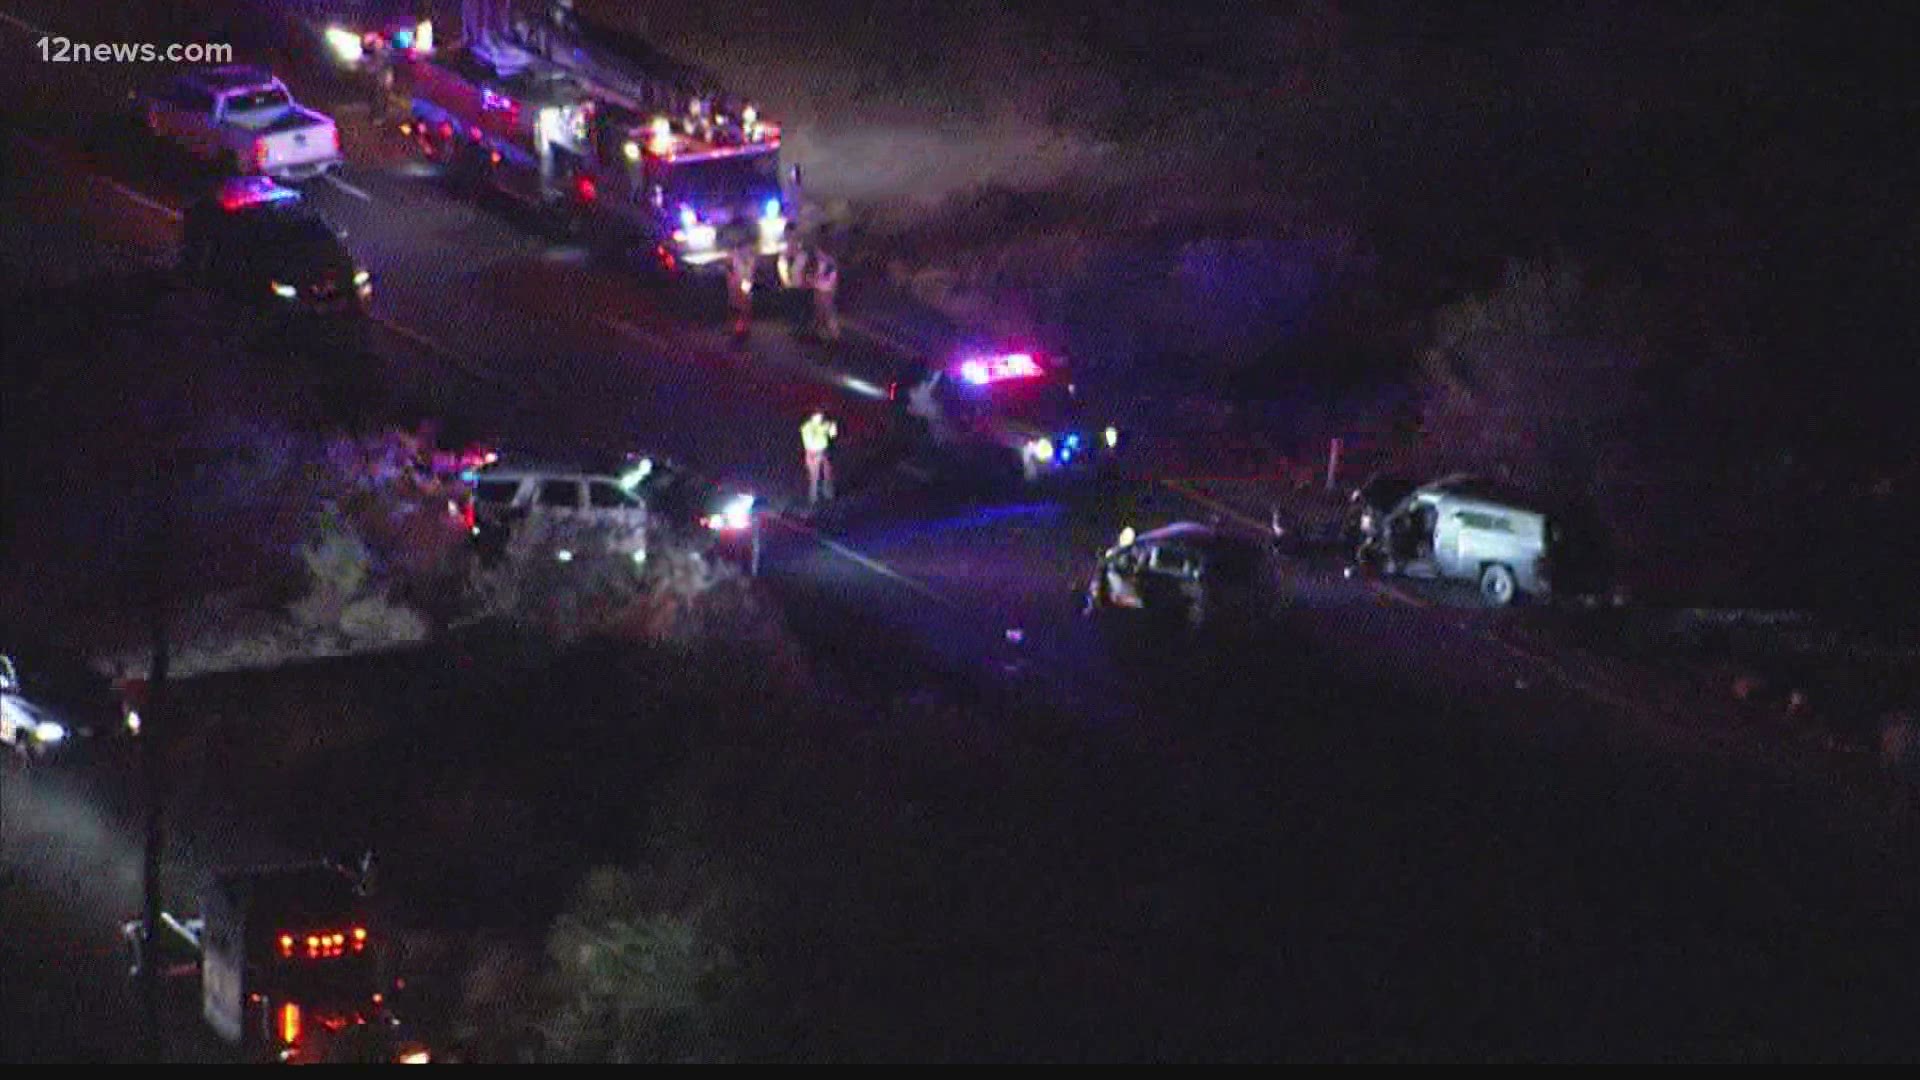 DPS says the crash involved four vehicles and six people were hurt.